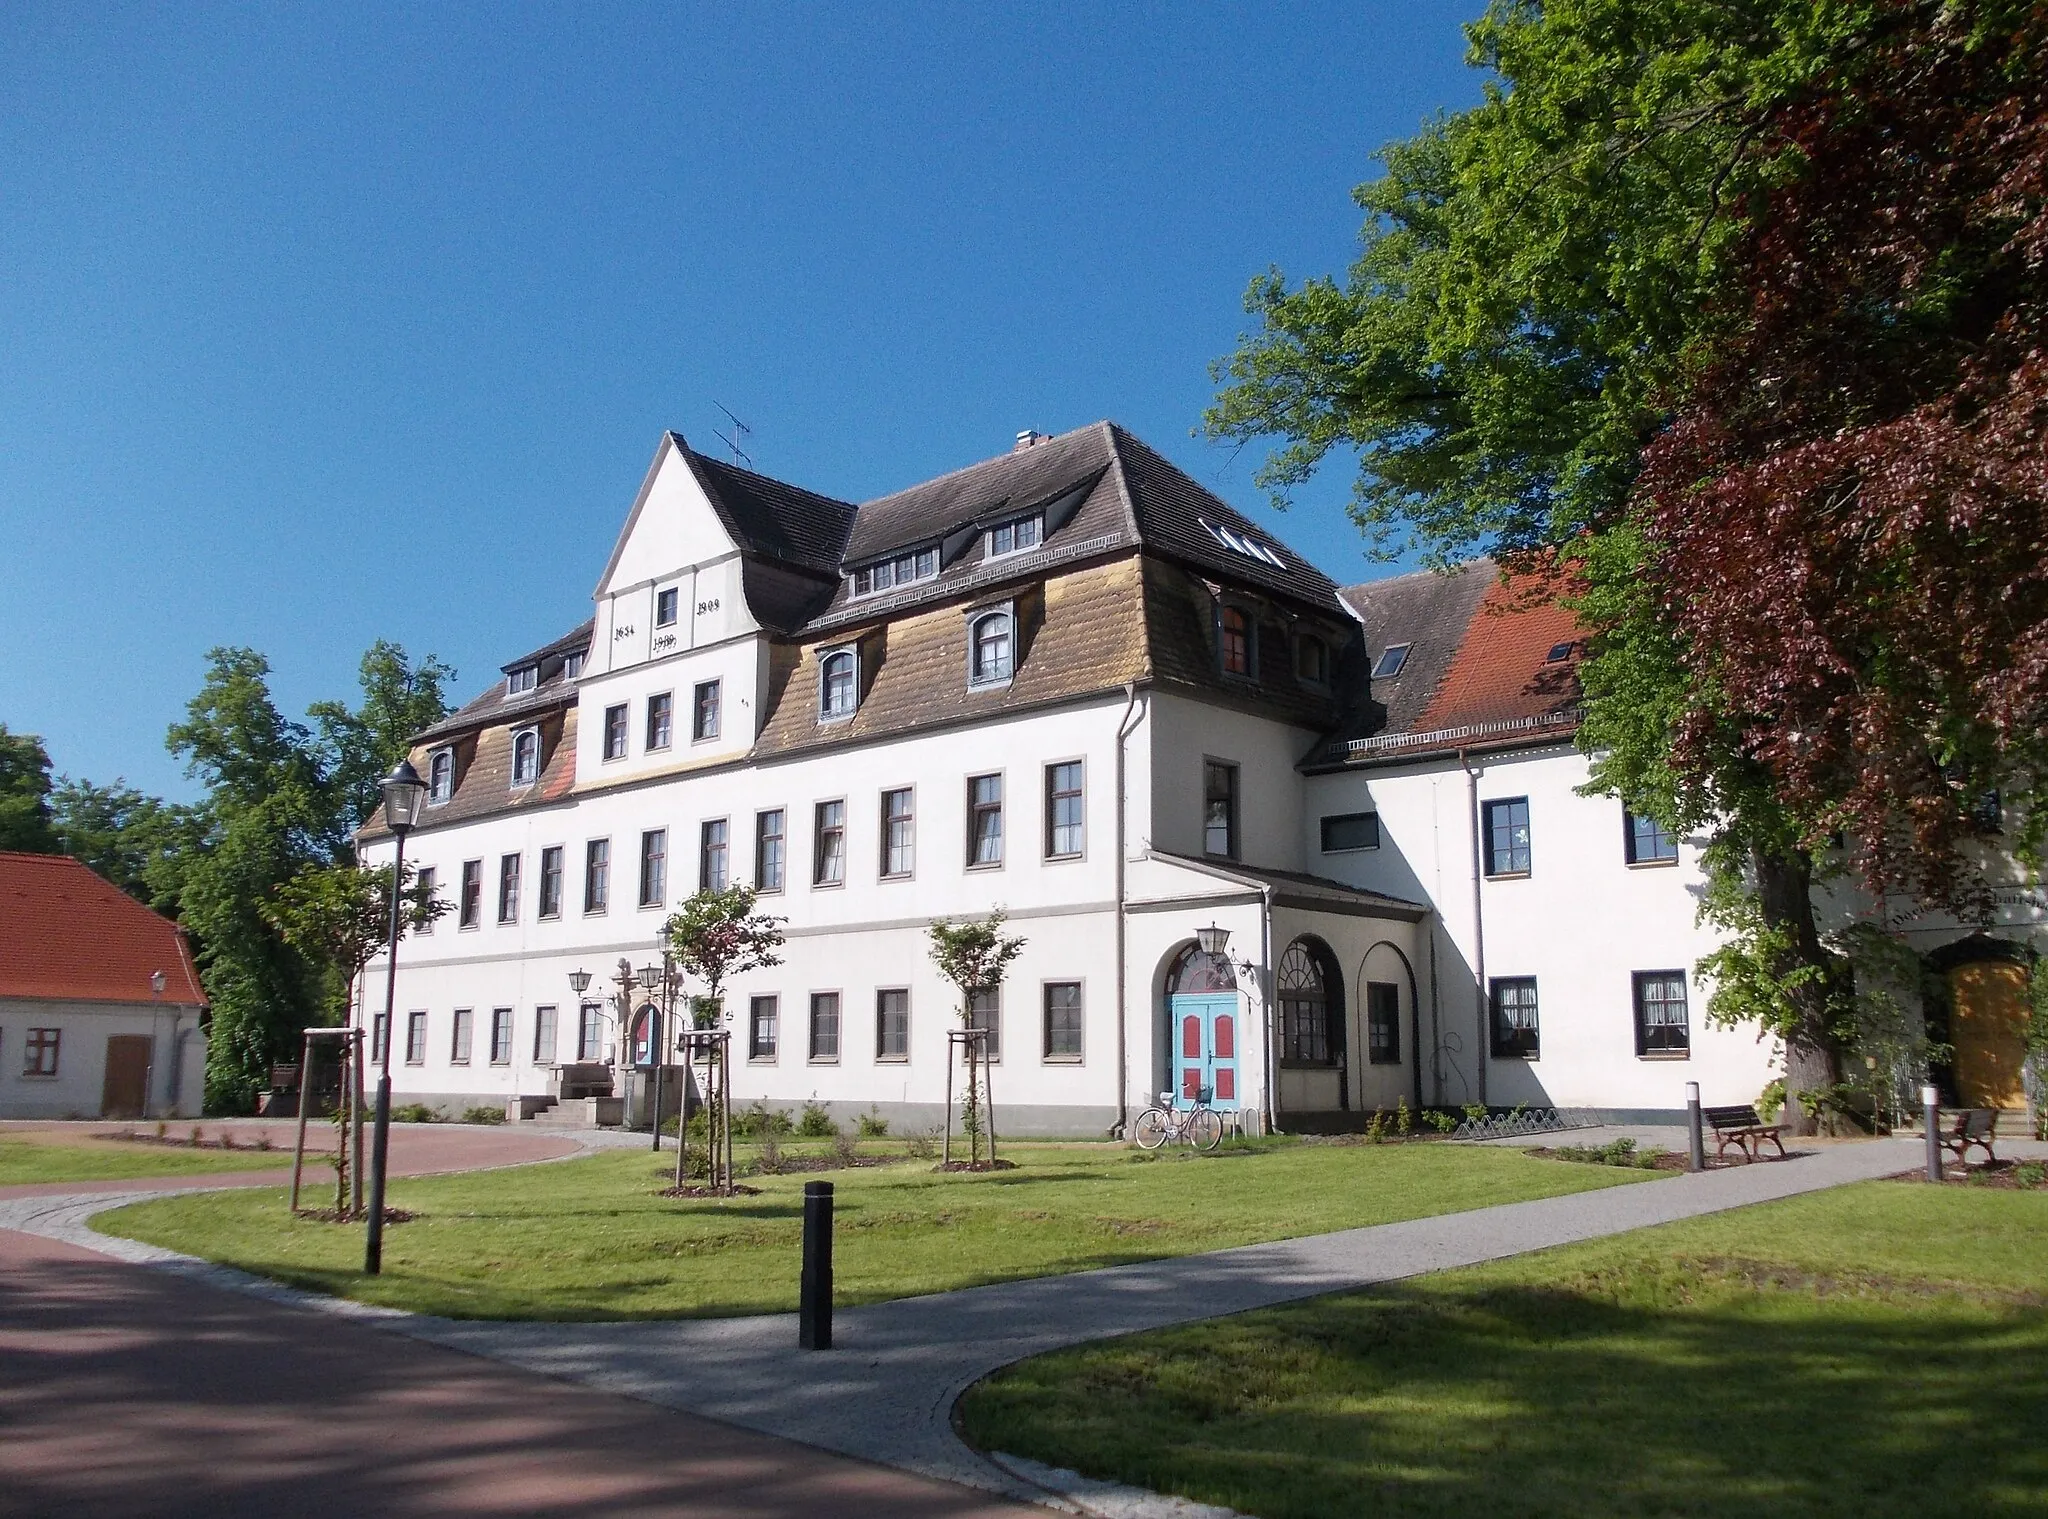 Photo showing: Manor house of Radis estate (Kemberg, Wittenberg district, Saxony-Anhalt), today a youth hostel